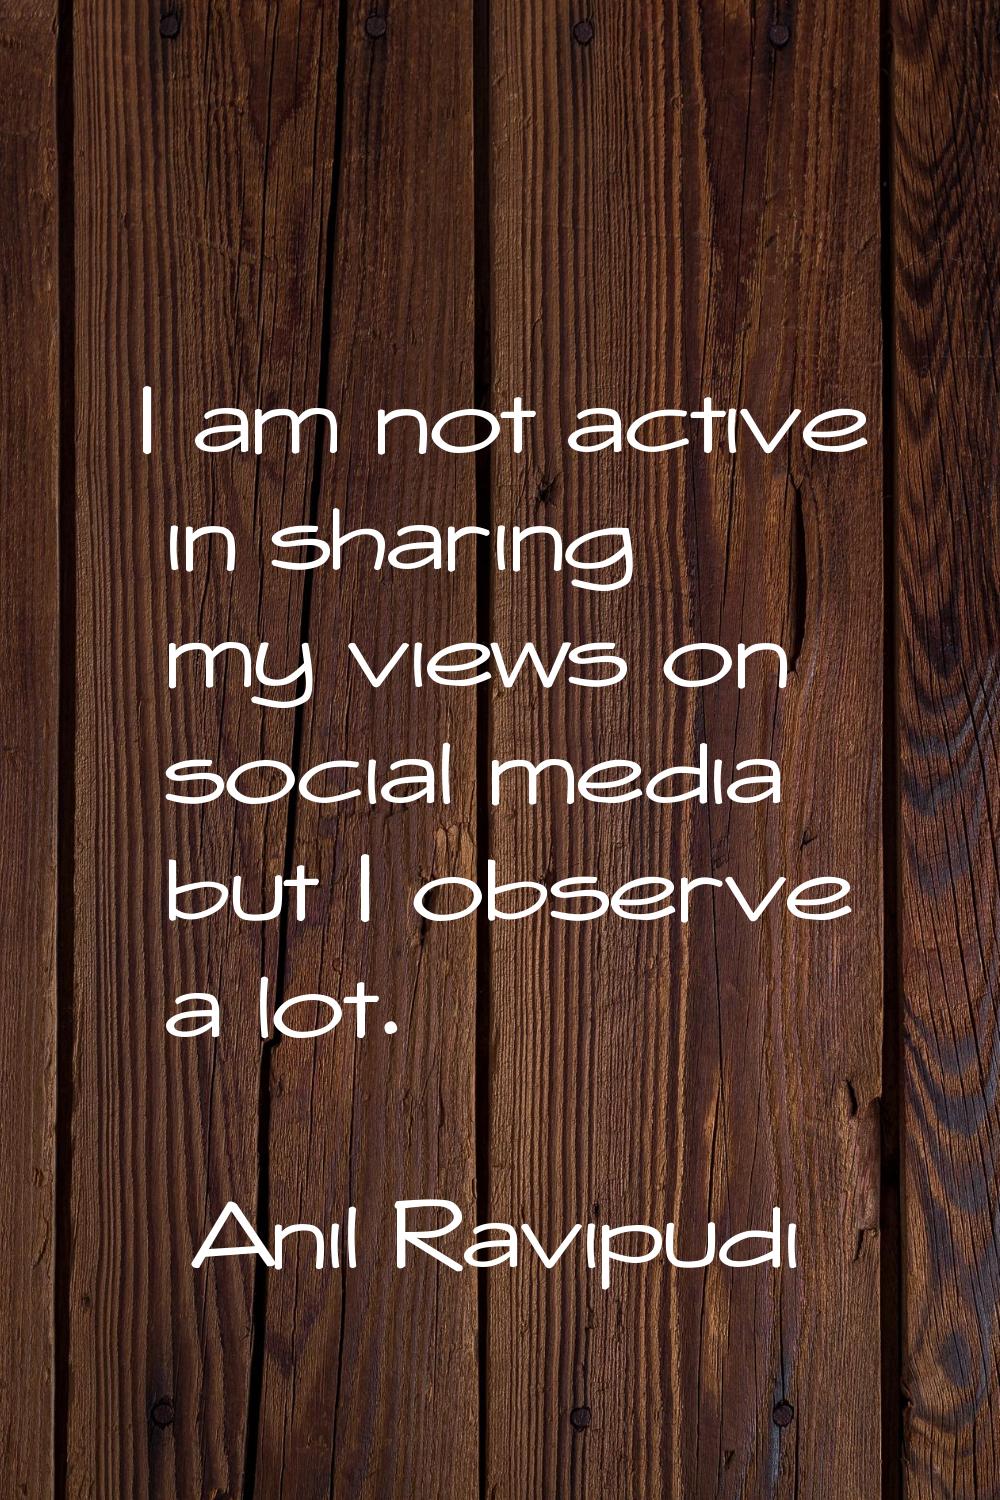 I am not active in sharing my views on social media but I observe a lot.